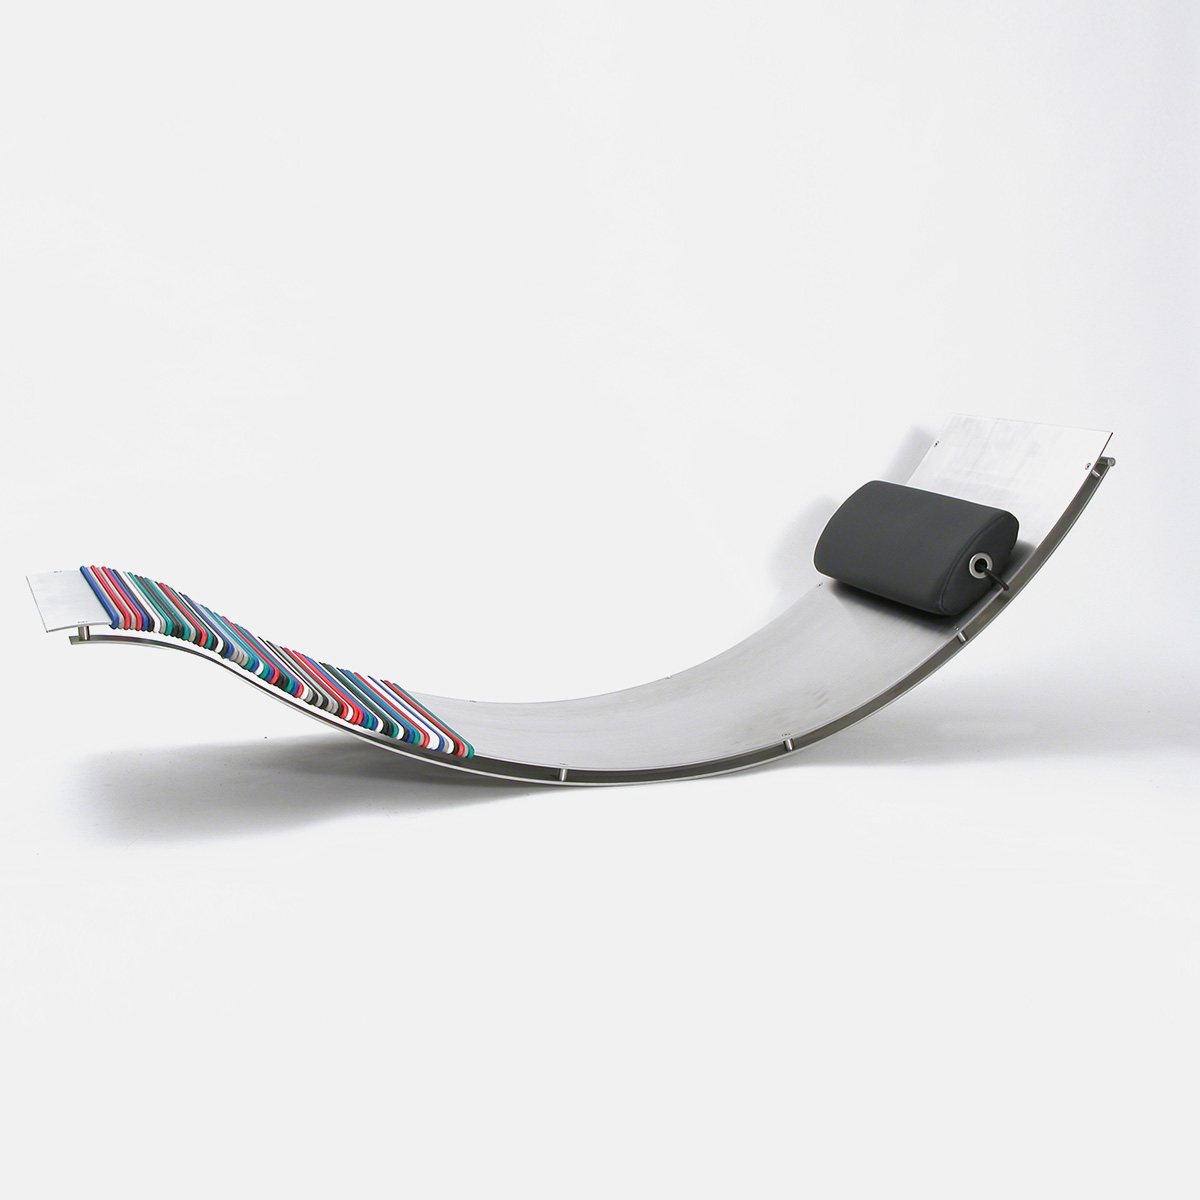 Chaise longue design Rolling by Roberto  Monte